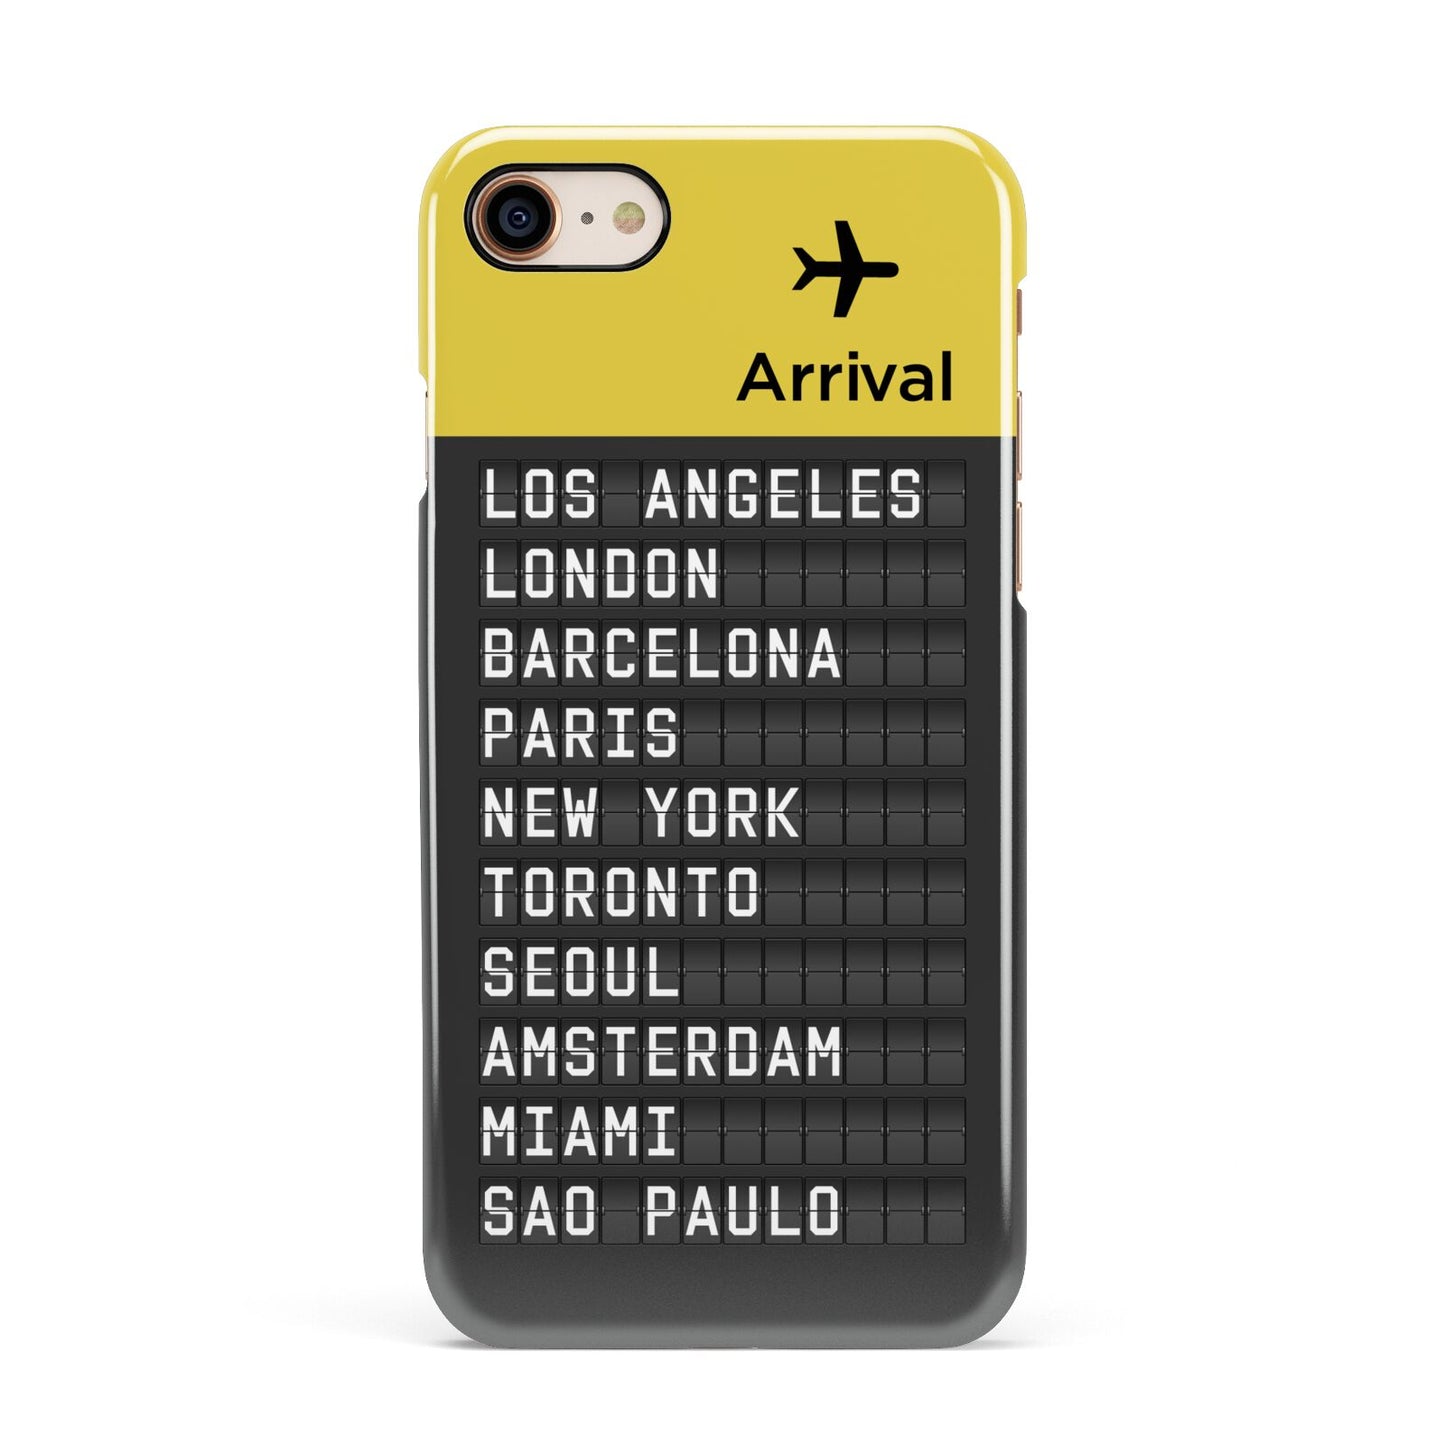 Airport Arrivals Board Apple iPhone 7 8 3D Snap Case